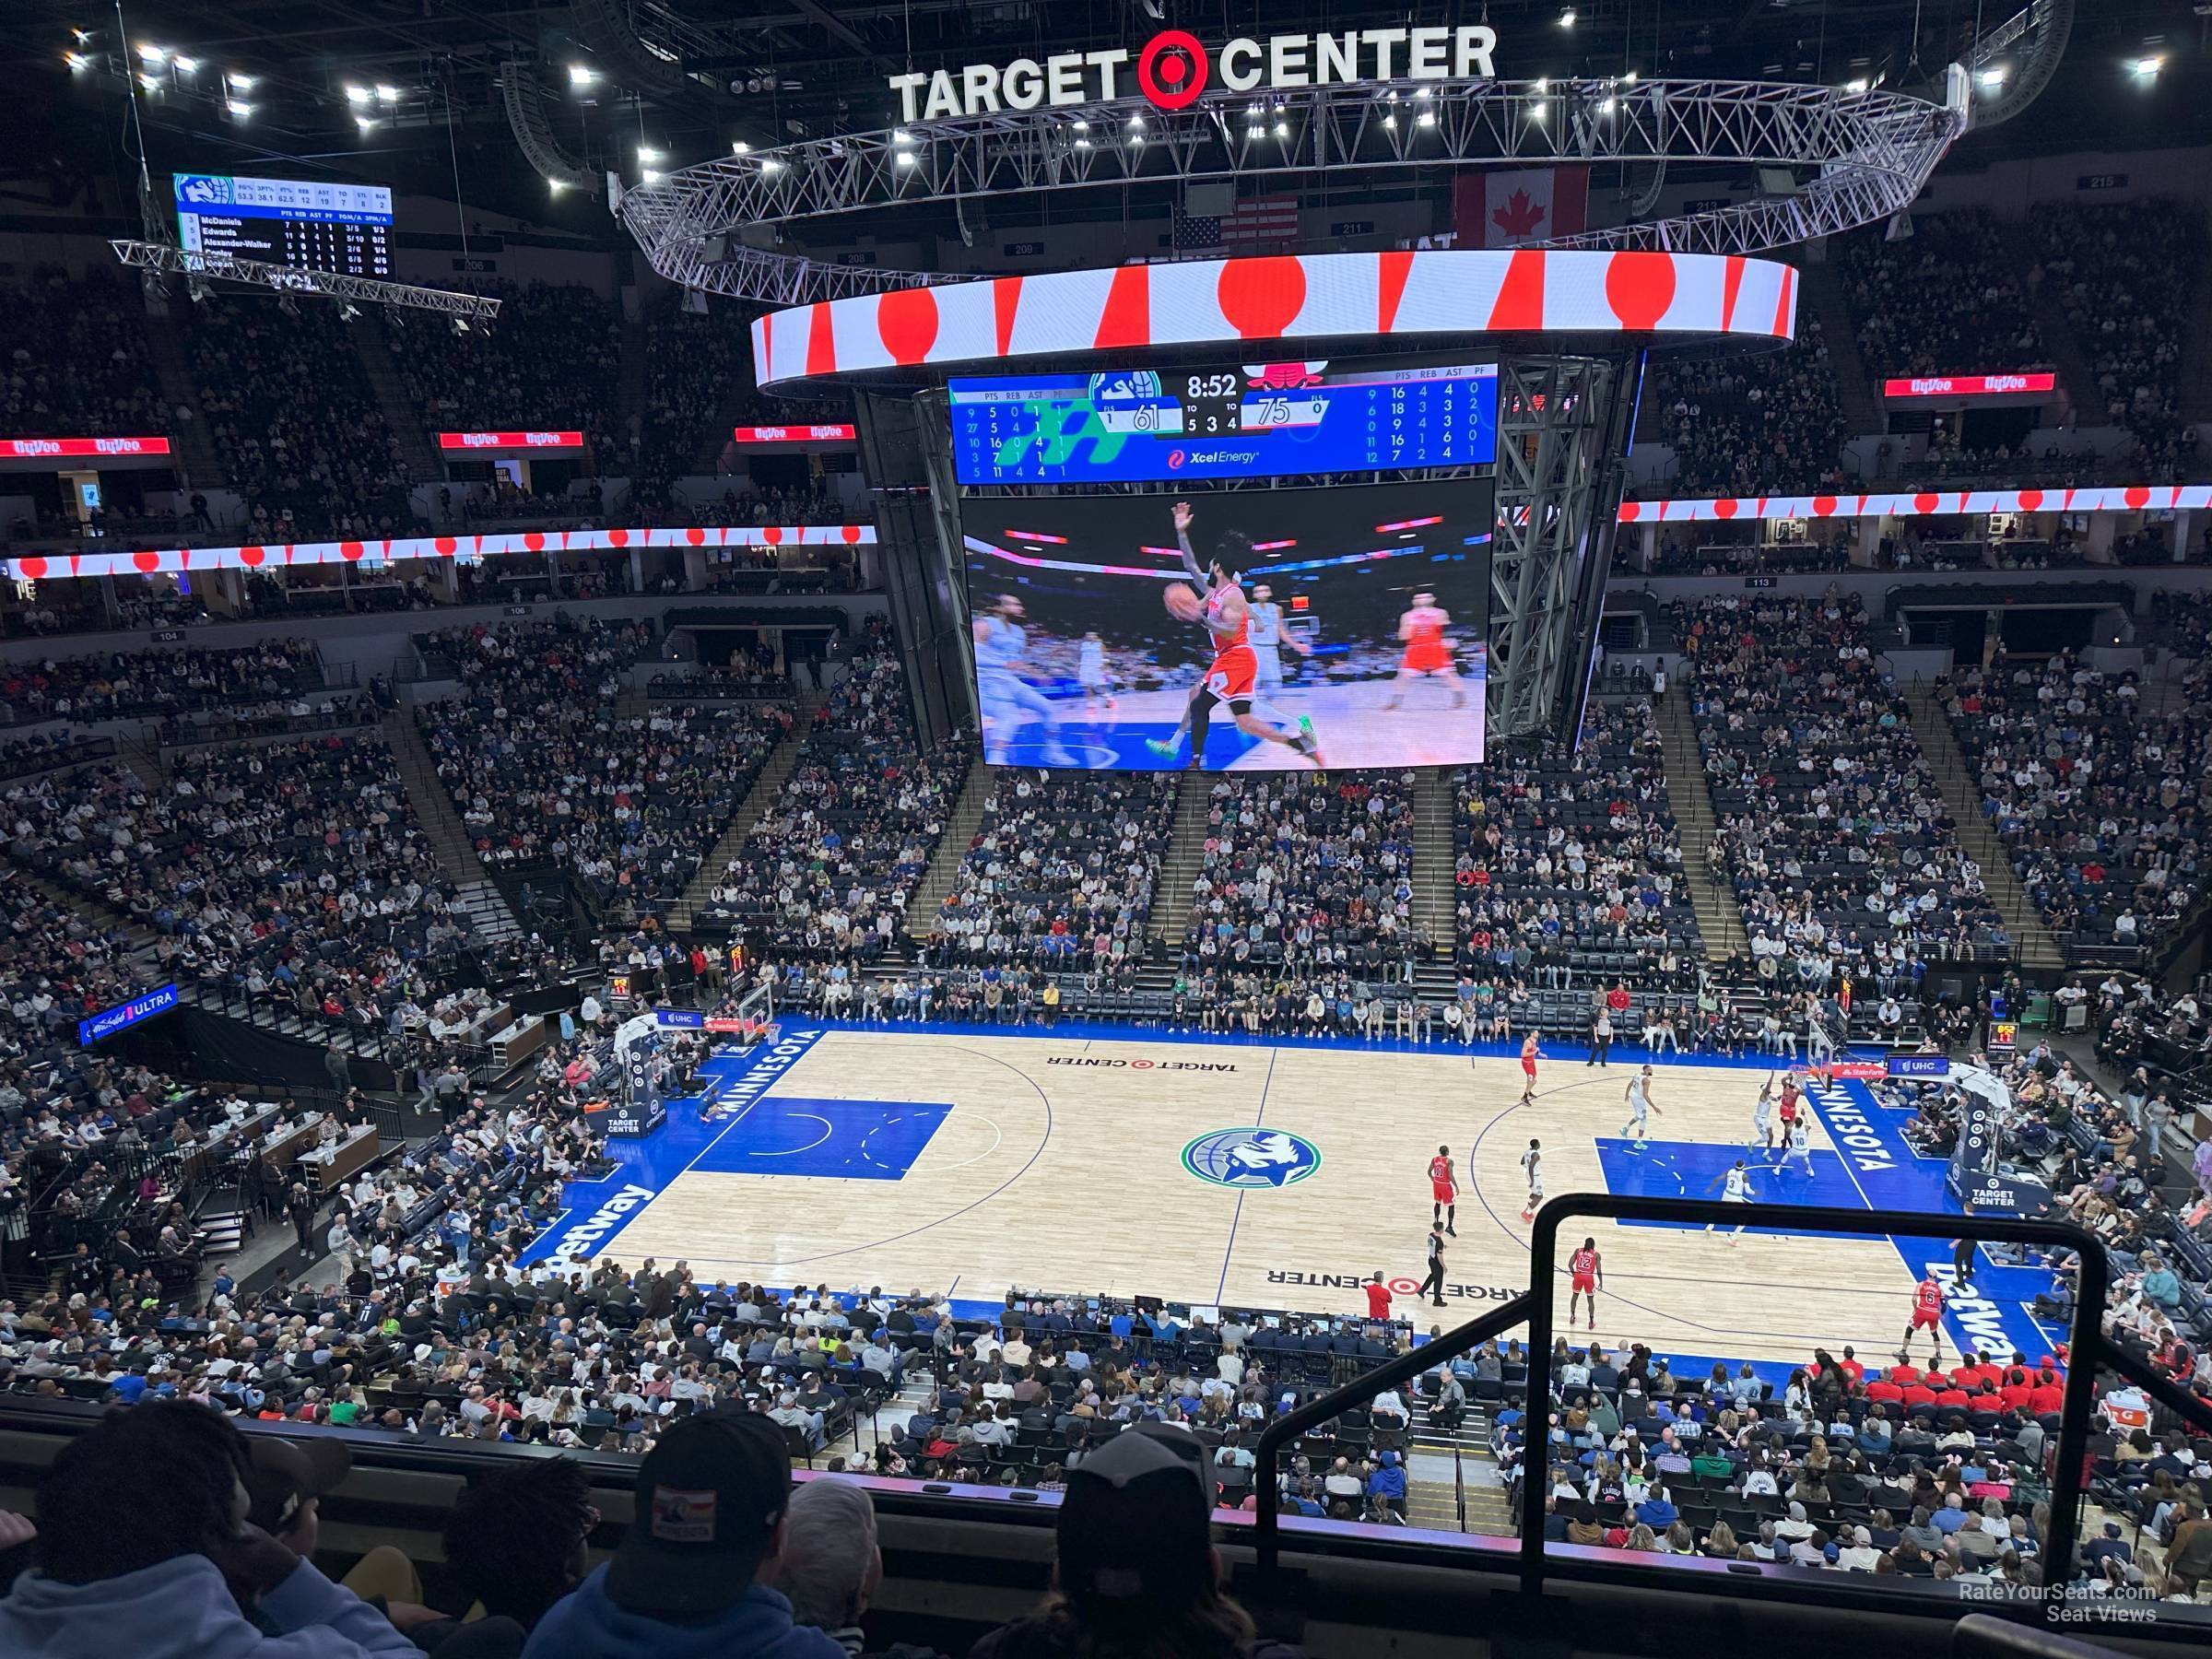 section 231, row c seat view  for basketball - target center